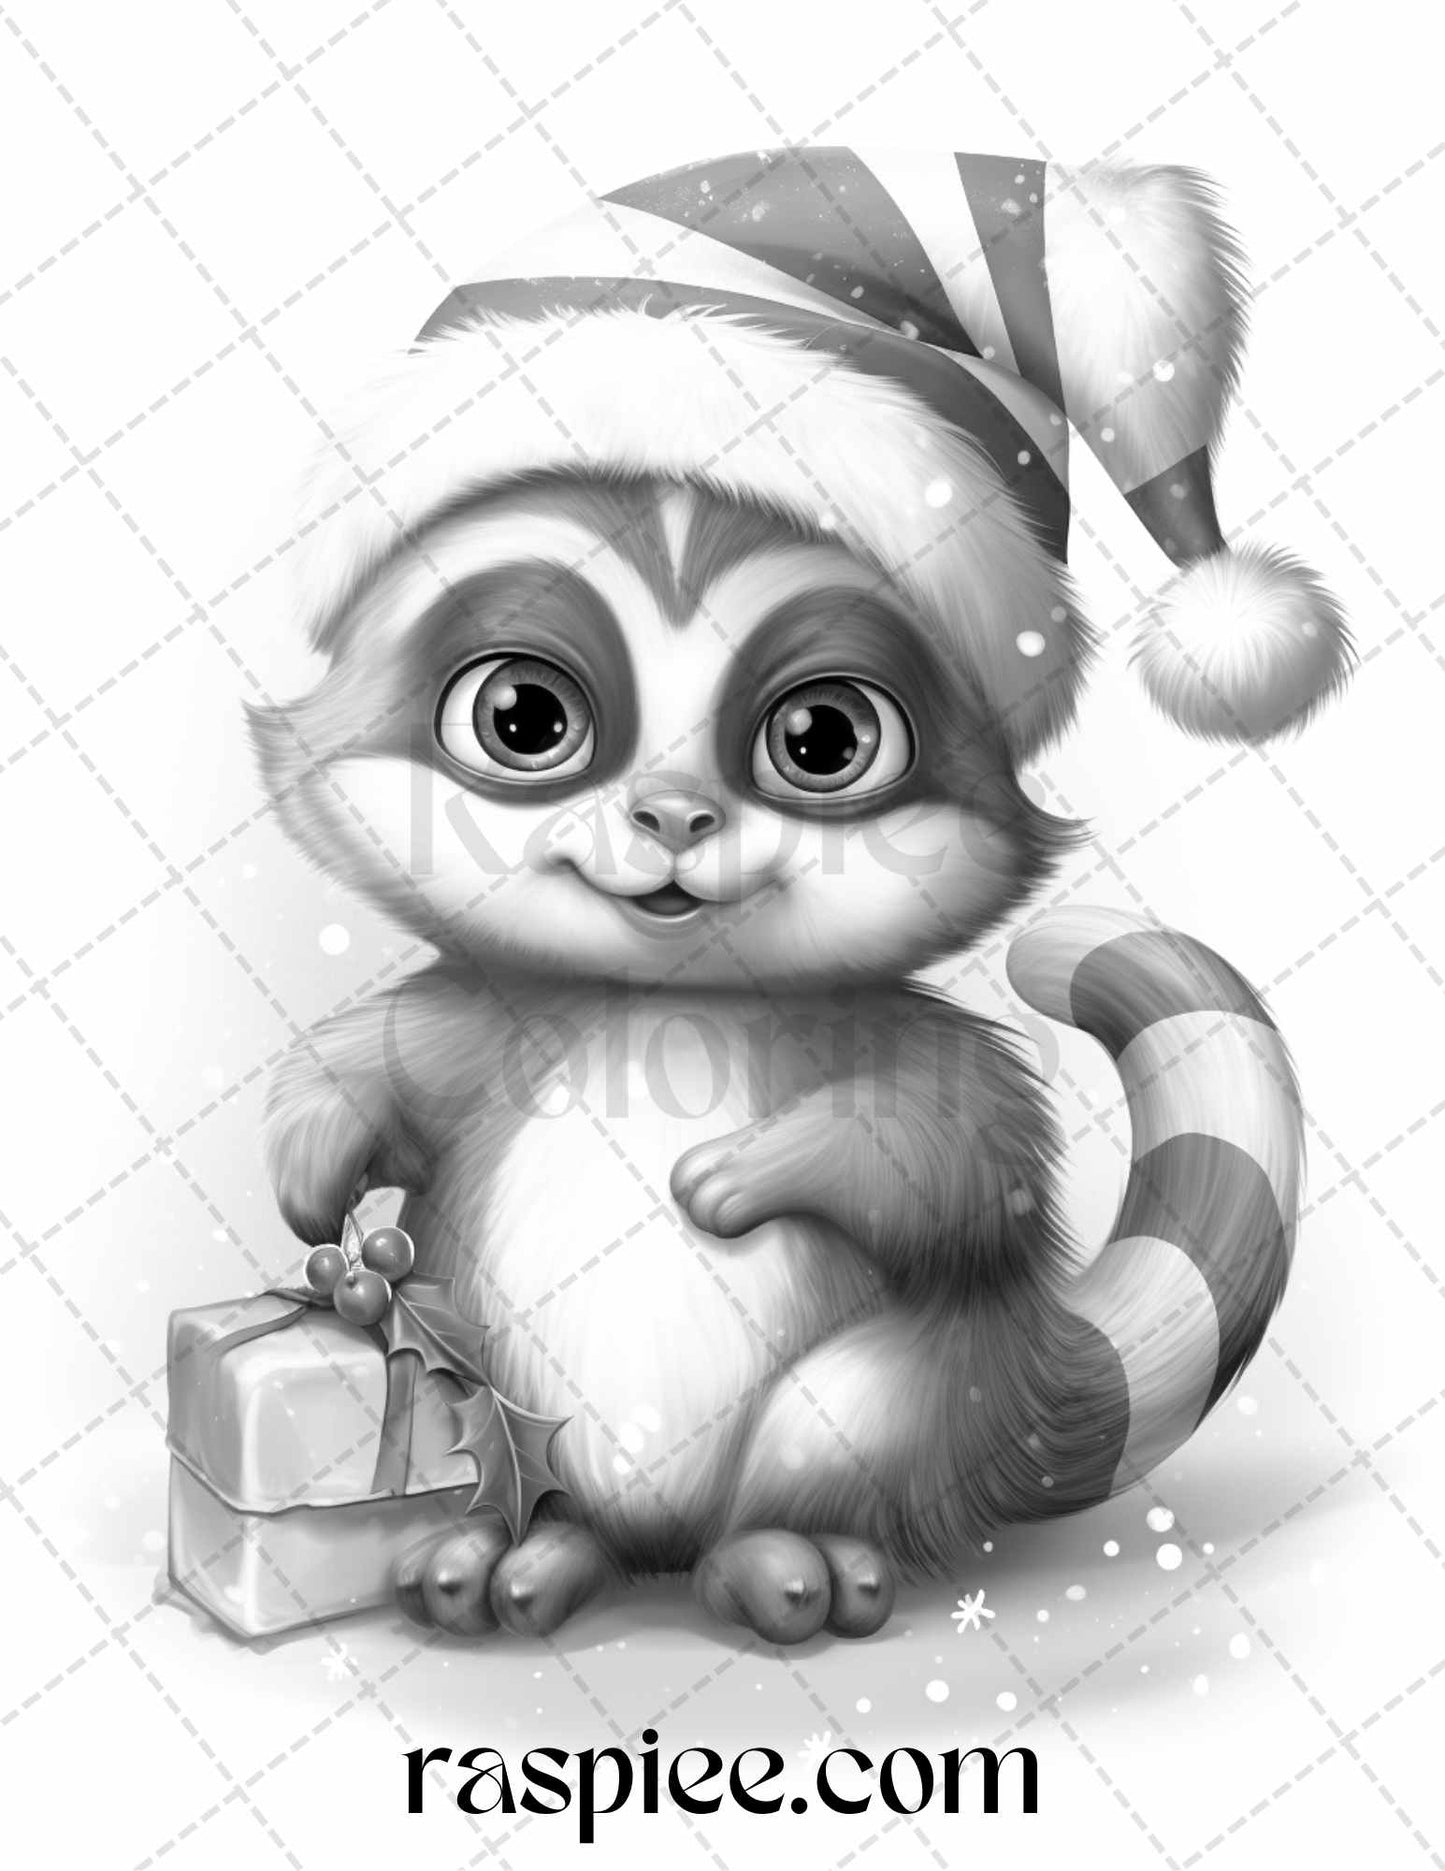 70 Christmas Critters Grayscale Coloring Pages Printable for Adults and Kids, PDF File Instant Download